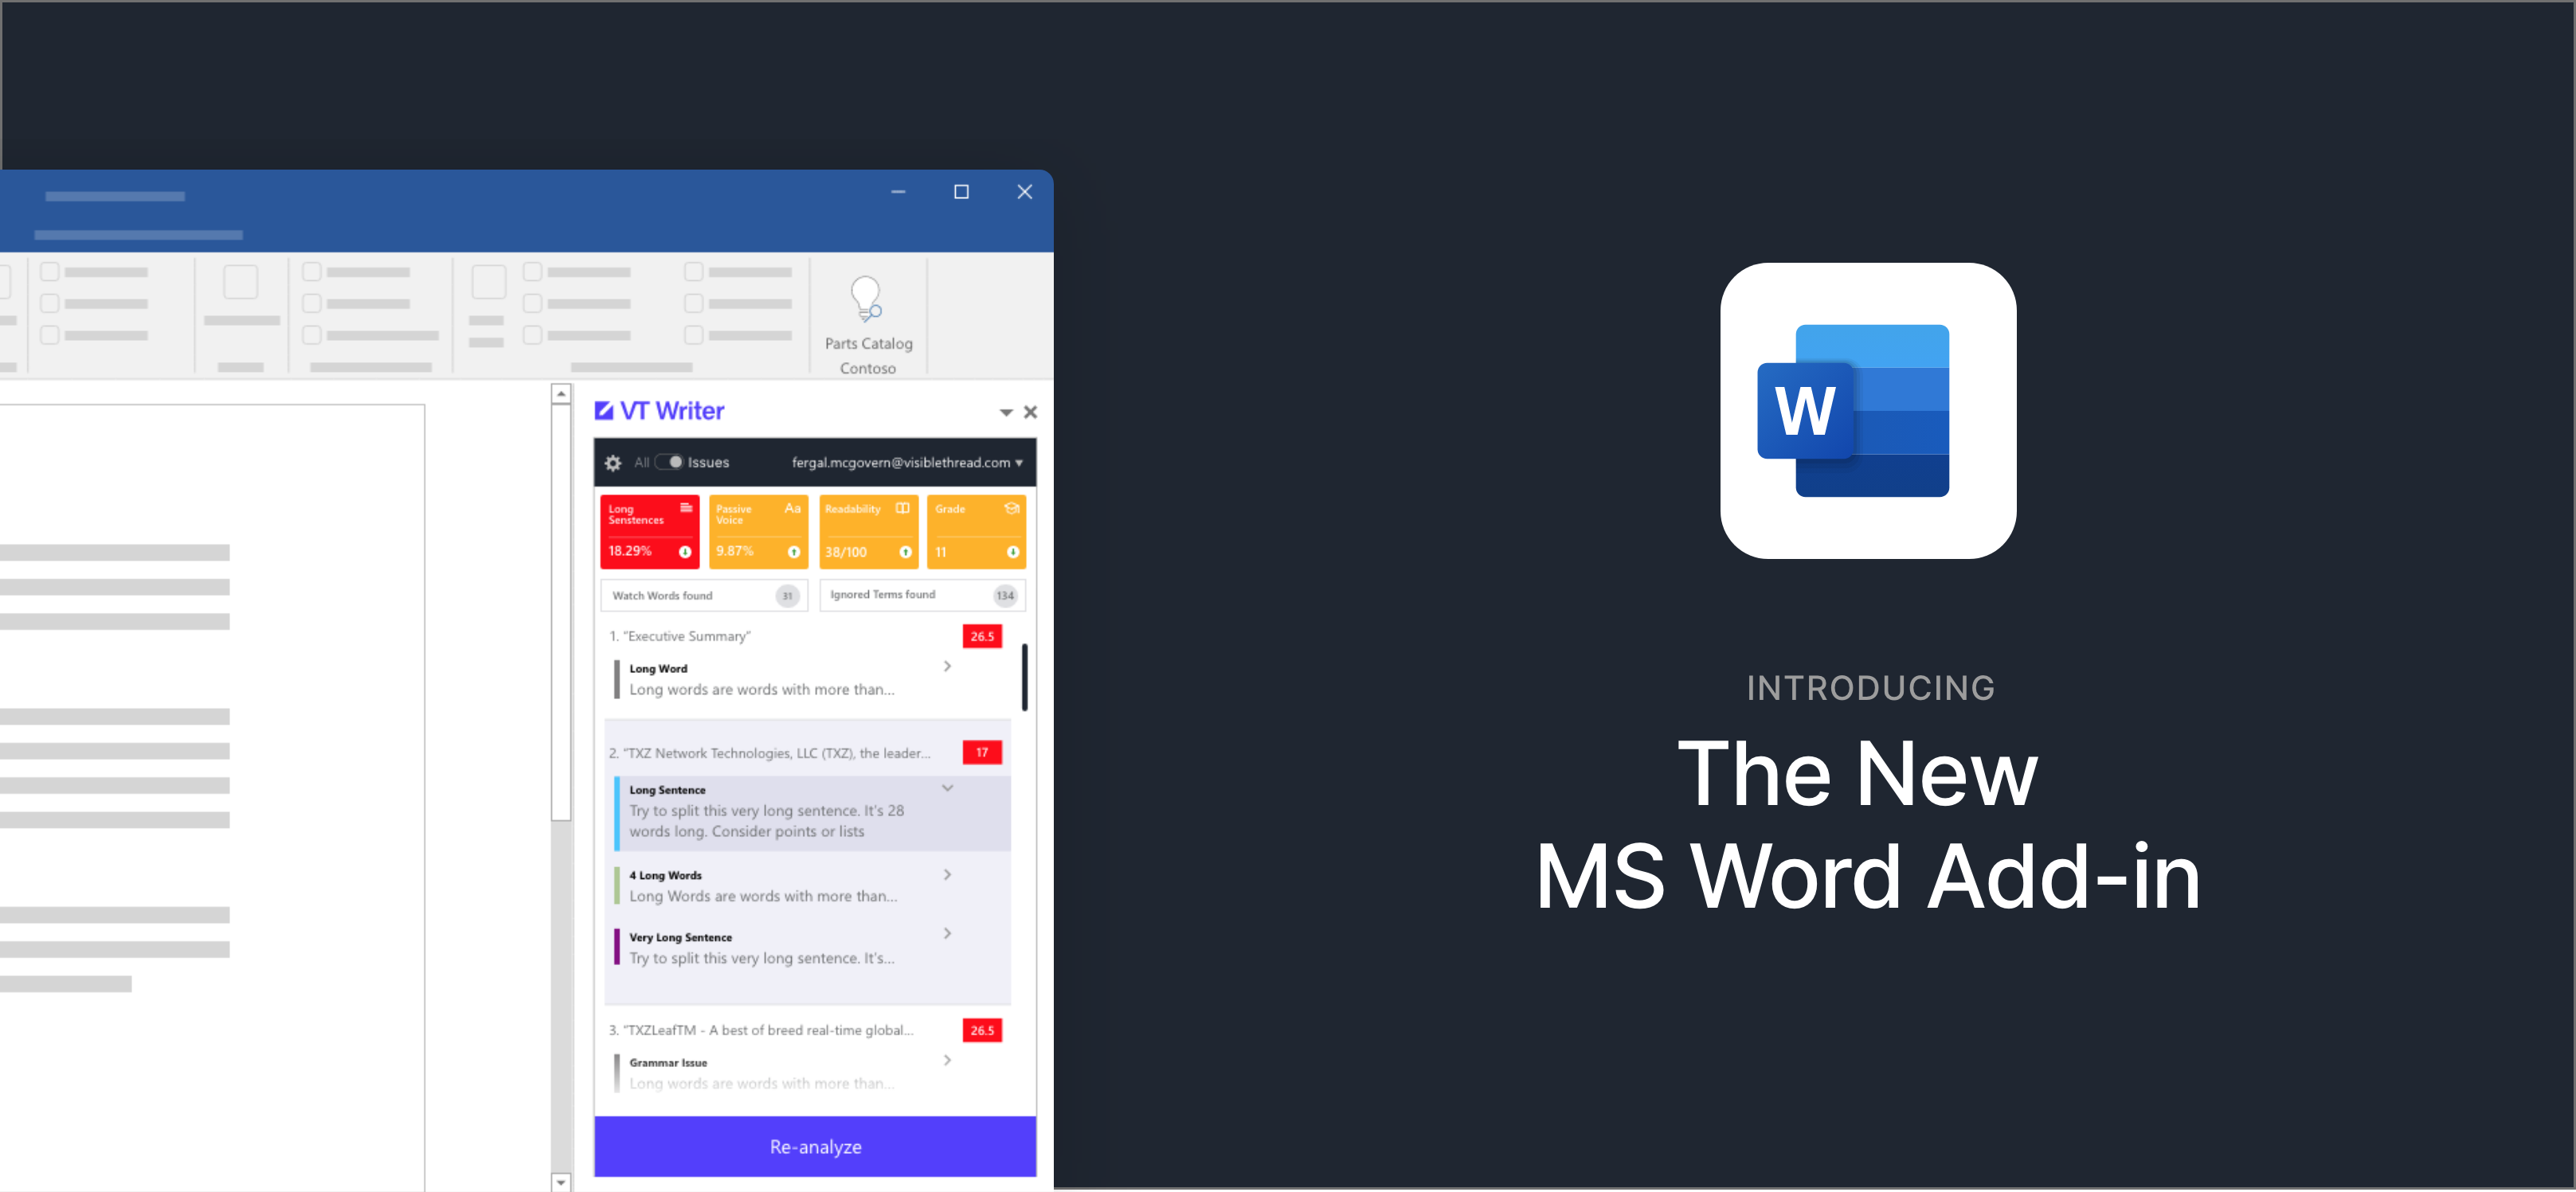 A screenshot of the New MS Word Add-in for VT Writer